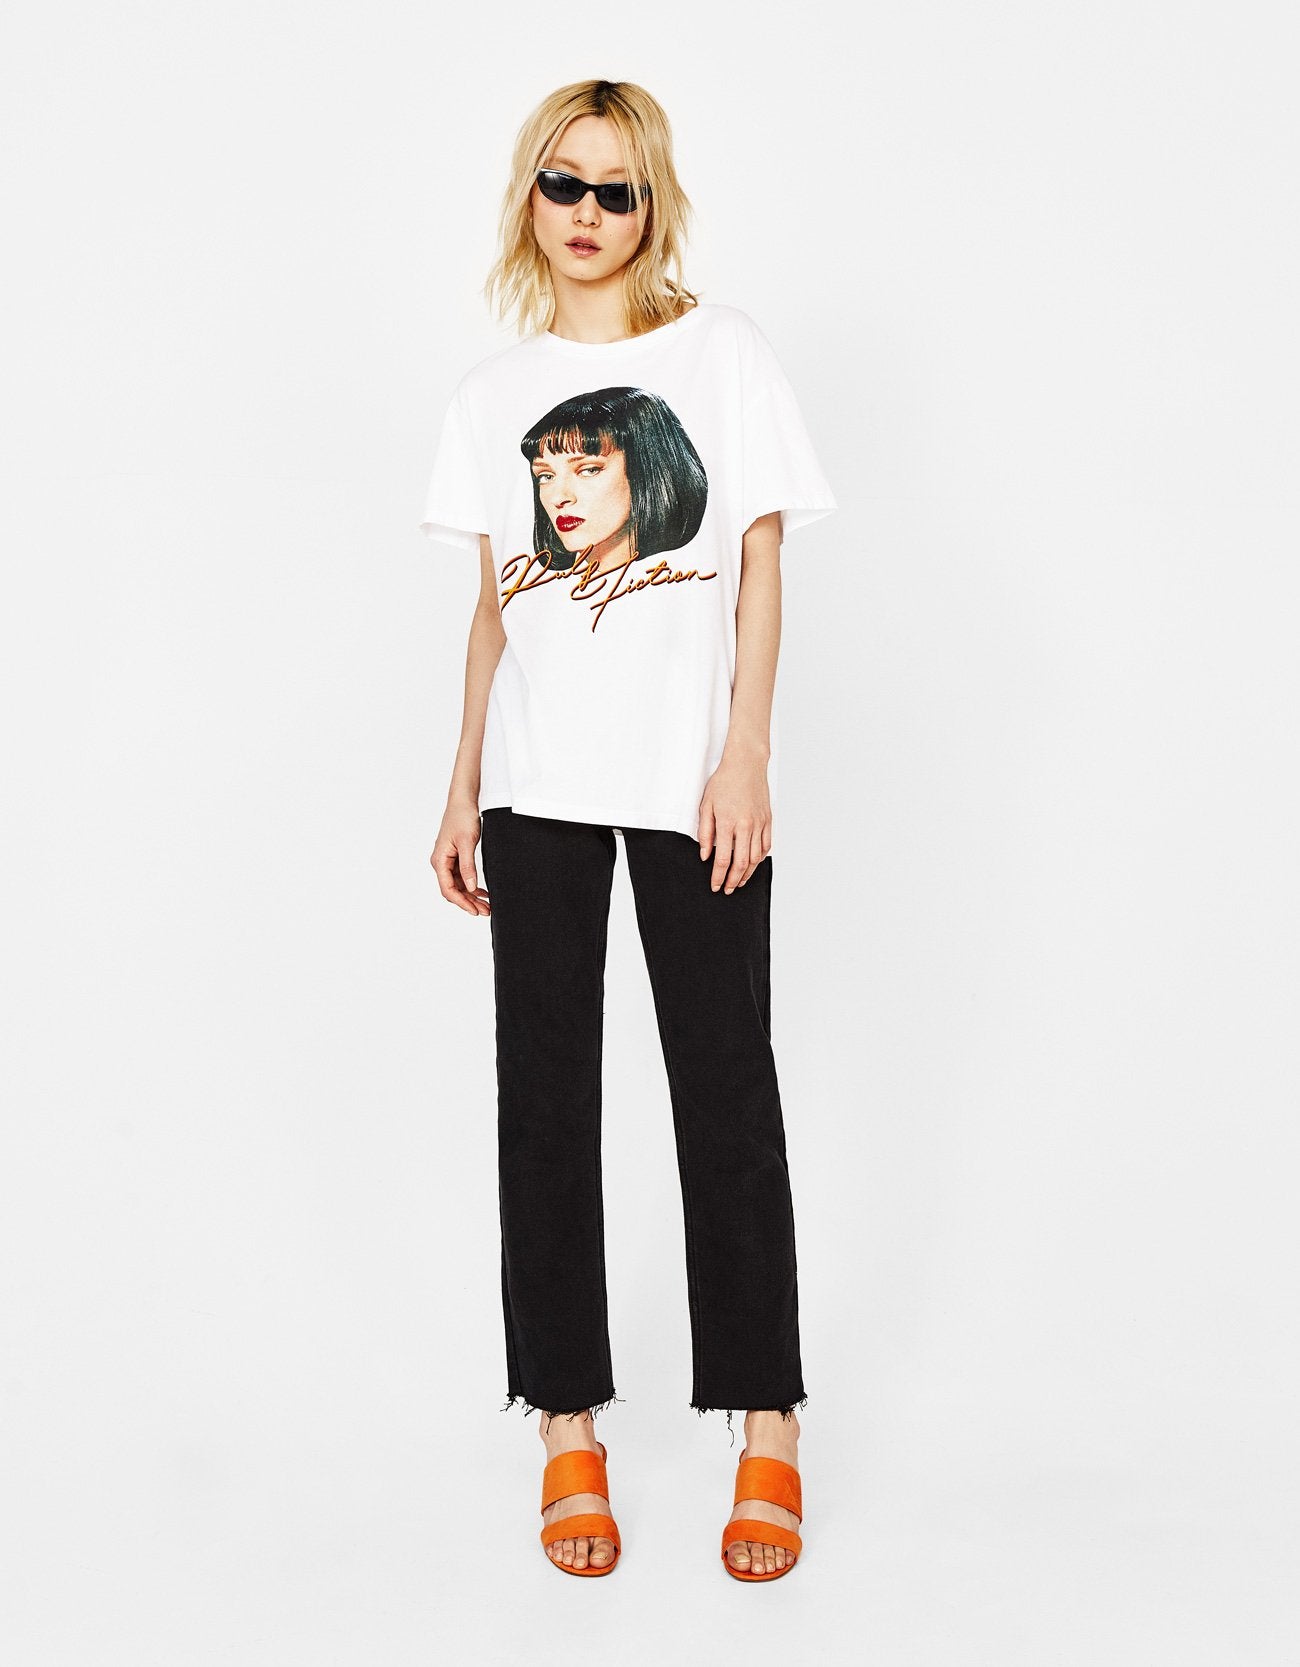 Pulp Fiction T-shirt with ecologically grown cotton